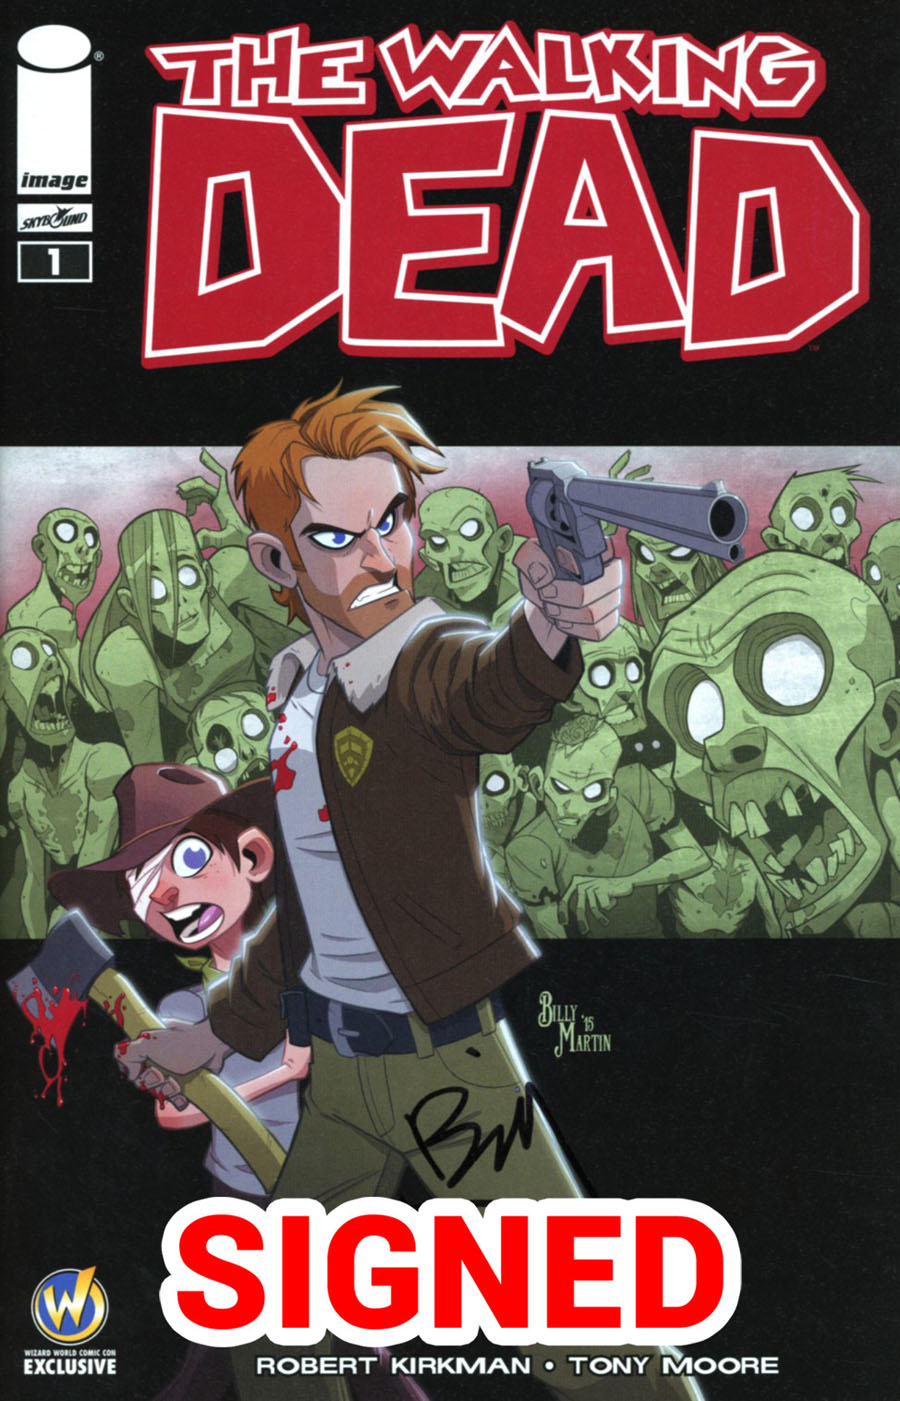 Walking Dead #1 Cover Z-F Wizard World Comic Con Tulsa Exclusive Billy Martin Color Variant Cover Signed by Billy Martin